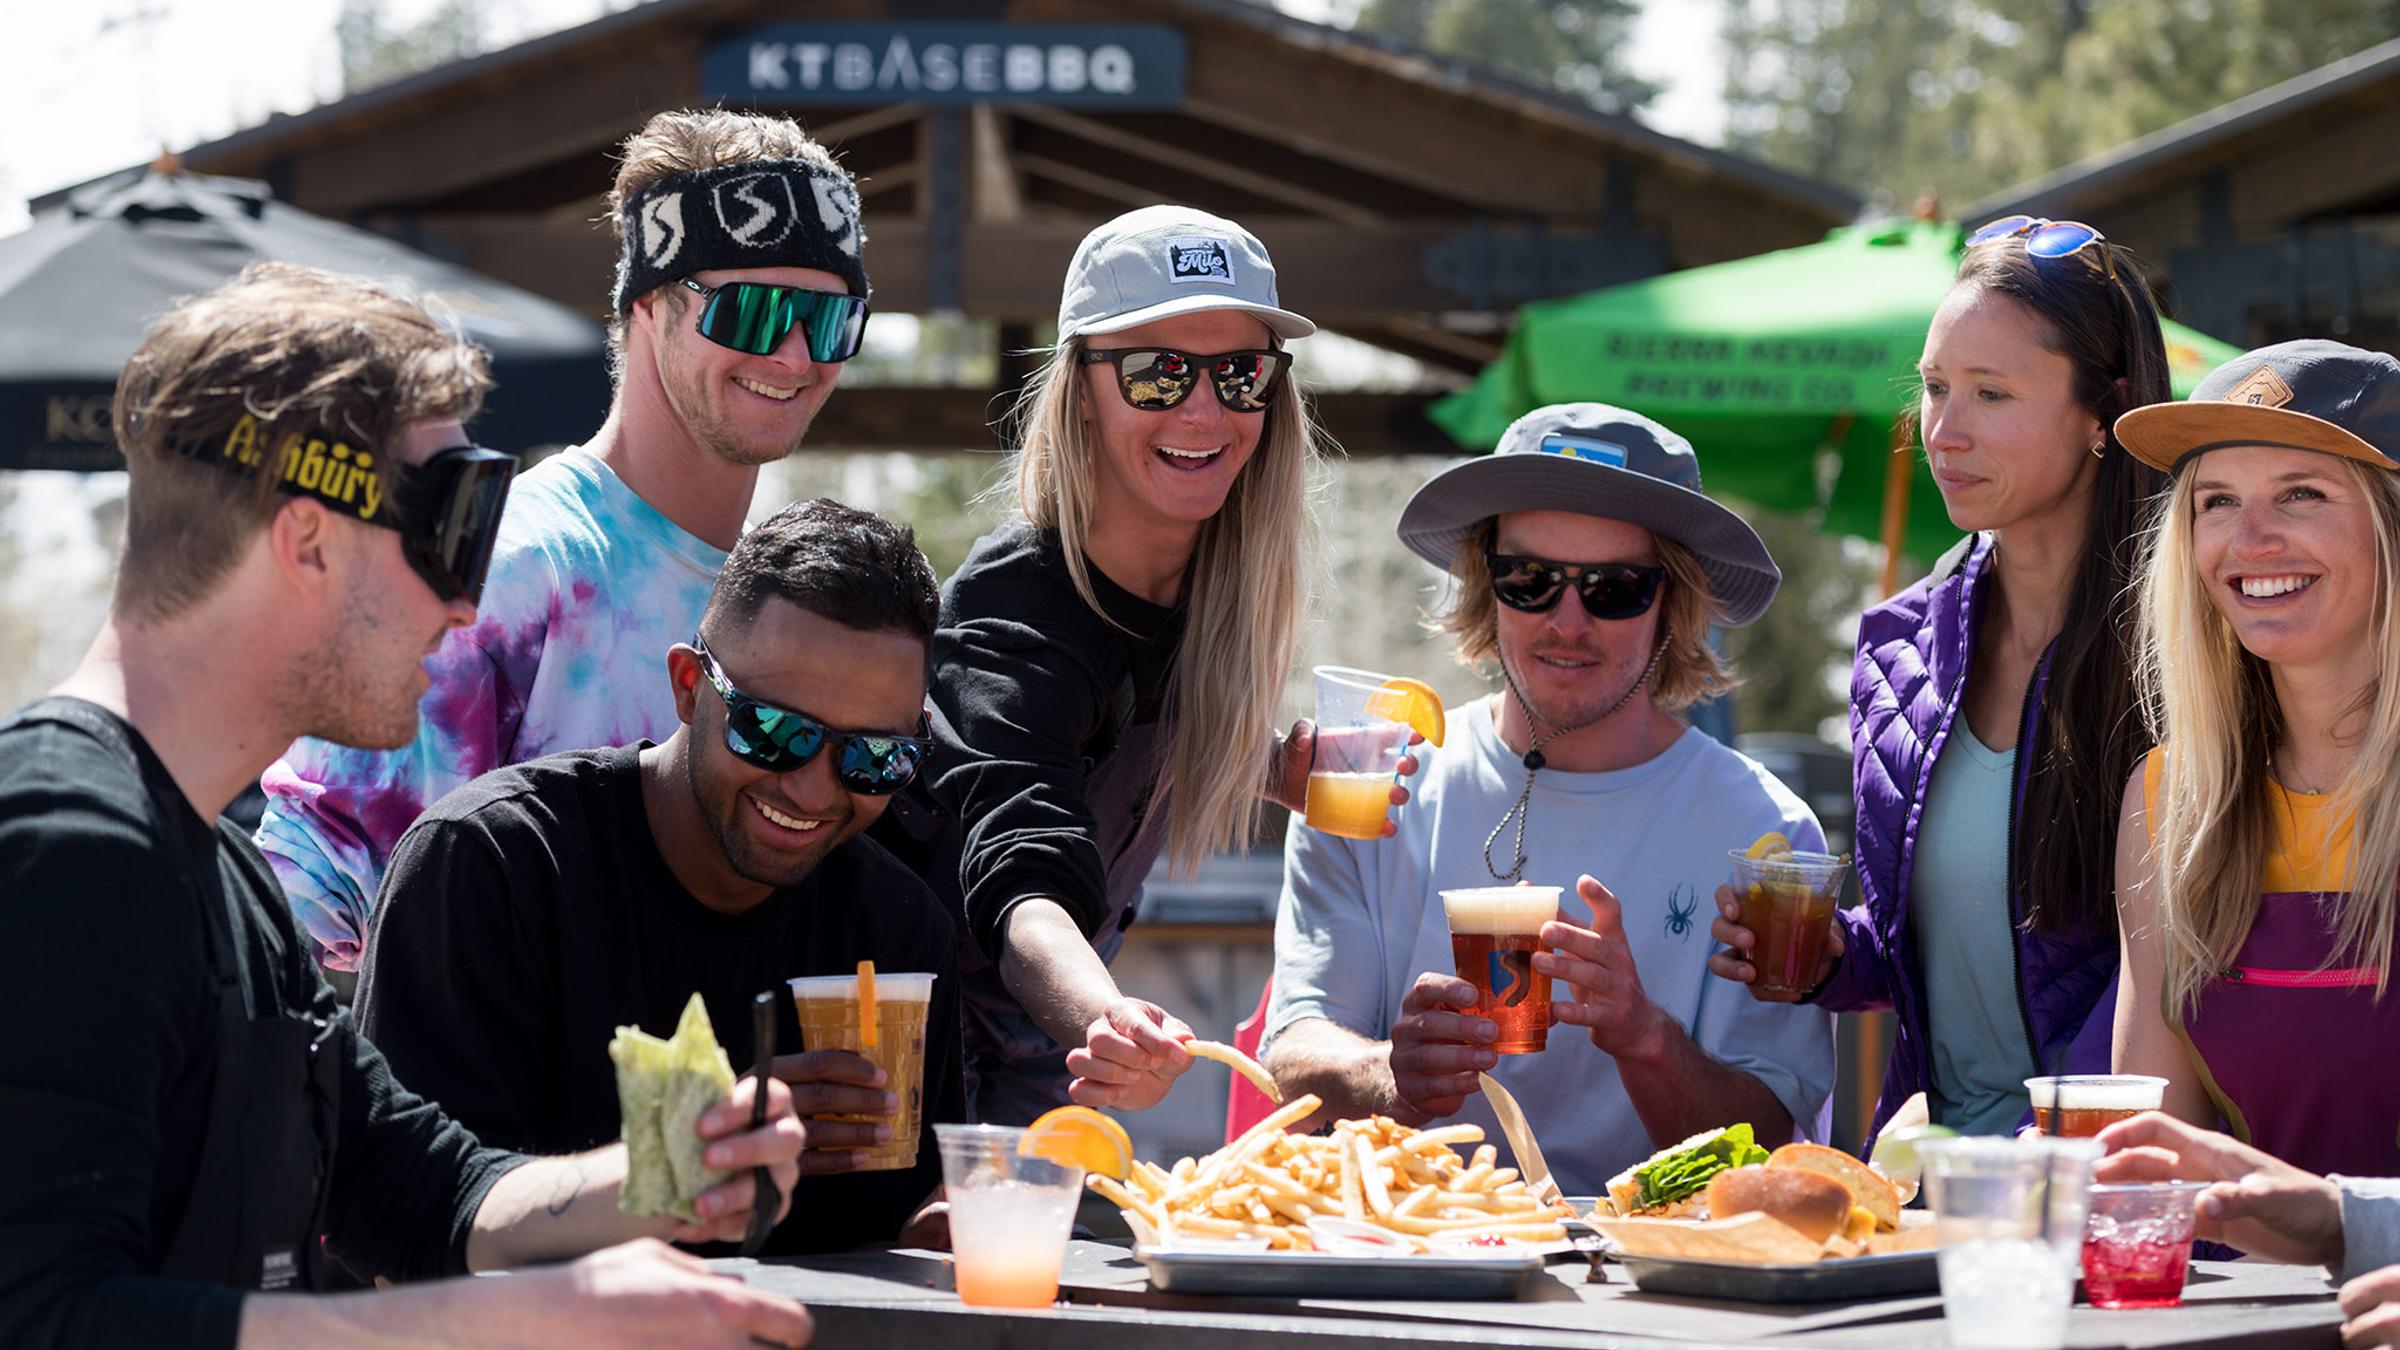 Squaw Valley athletes enjoy beers and food at KT Base Bar on a spring day.